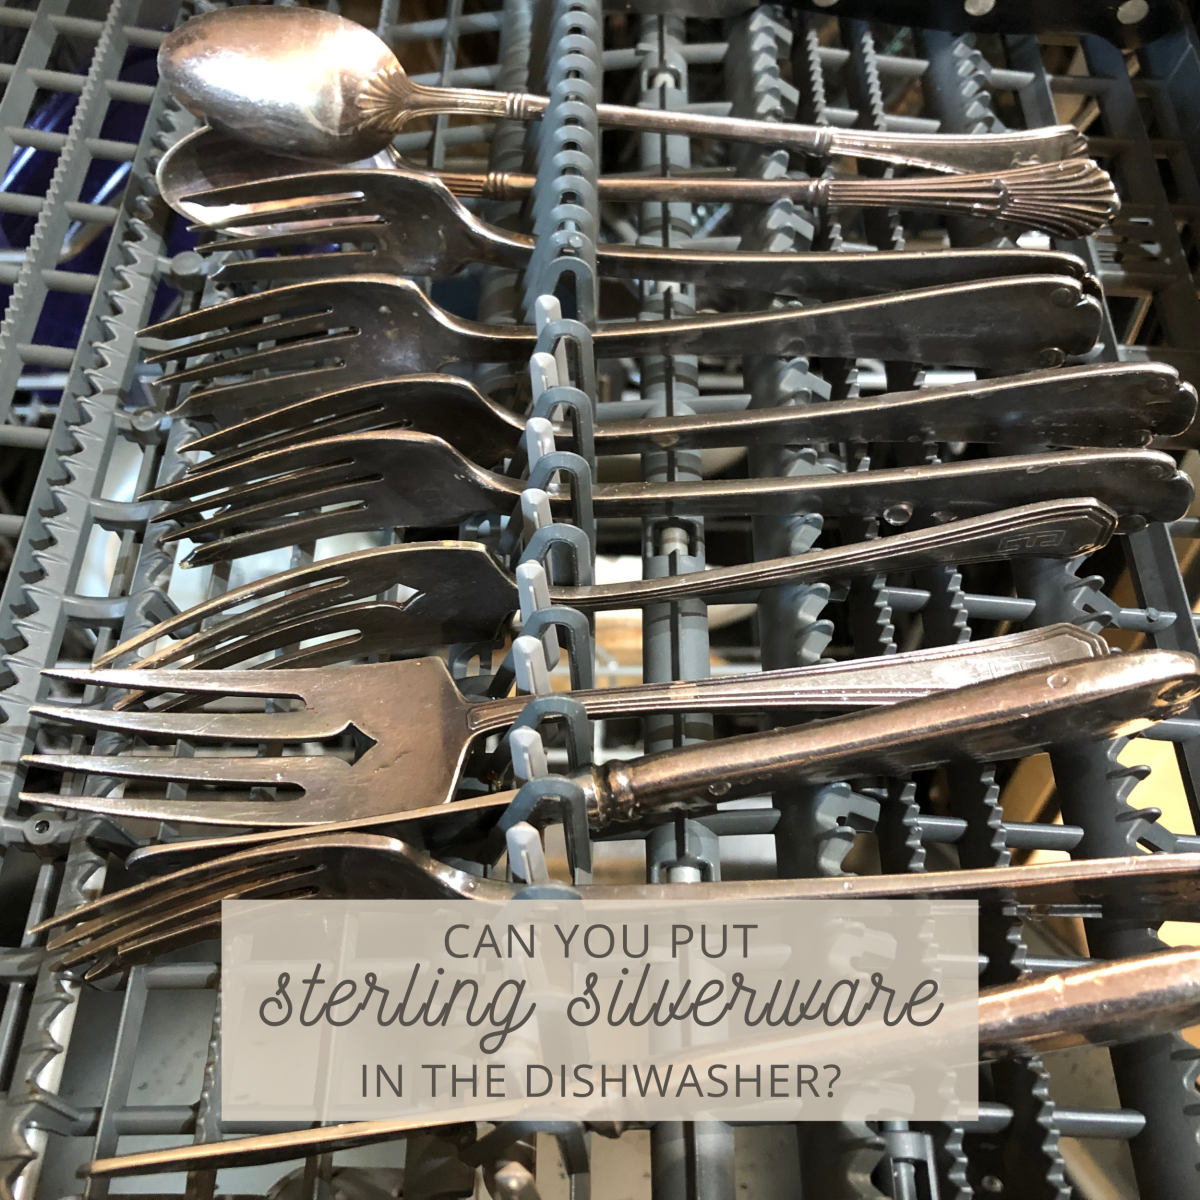 Can you safely wash sterling silver and silverware in the dishwasher?